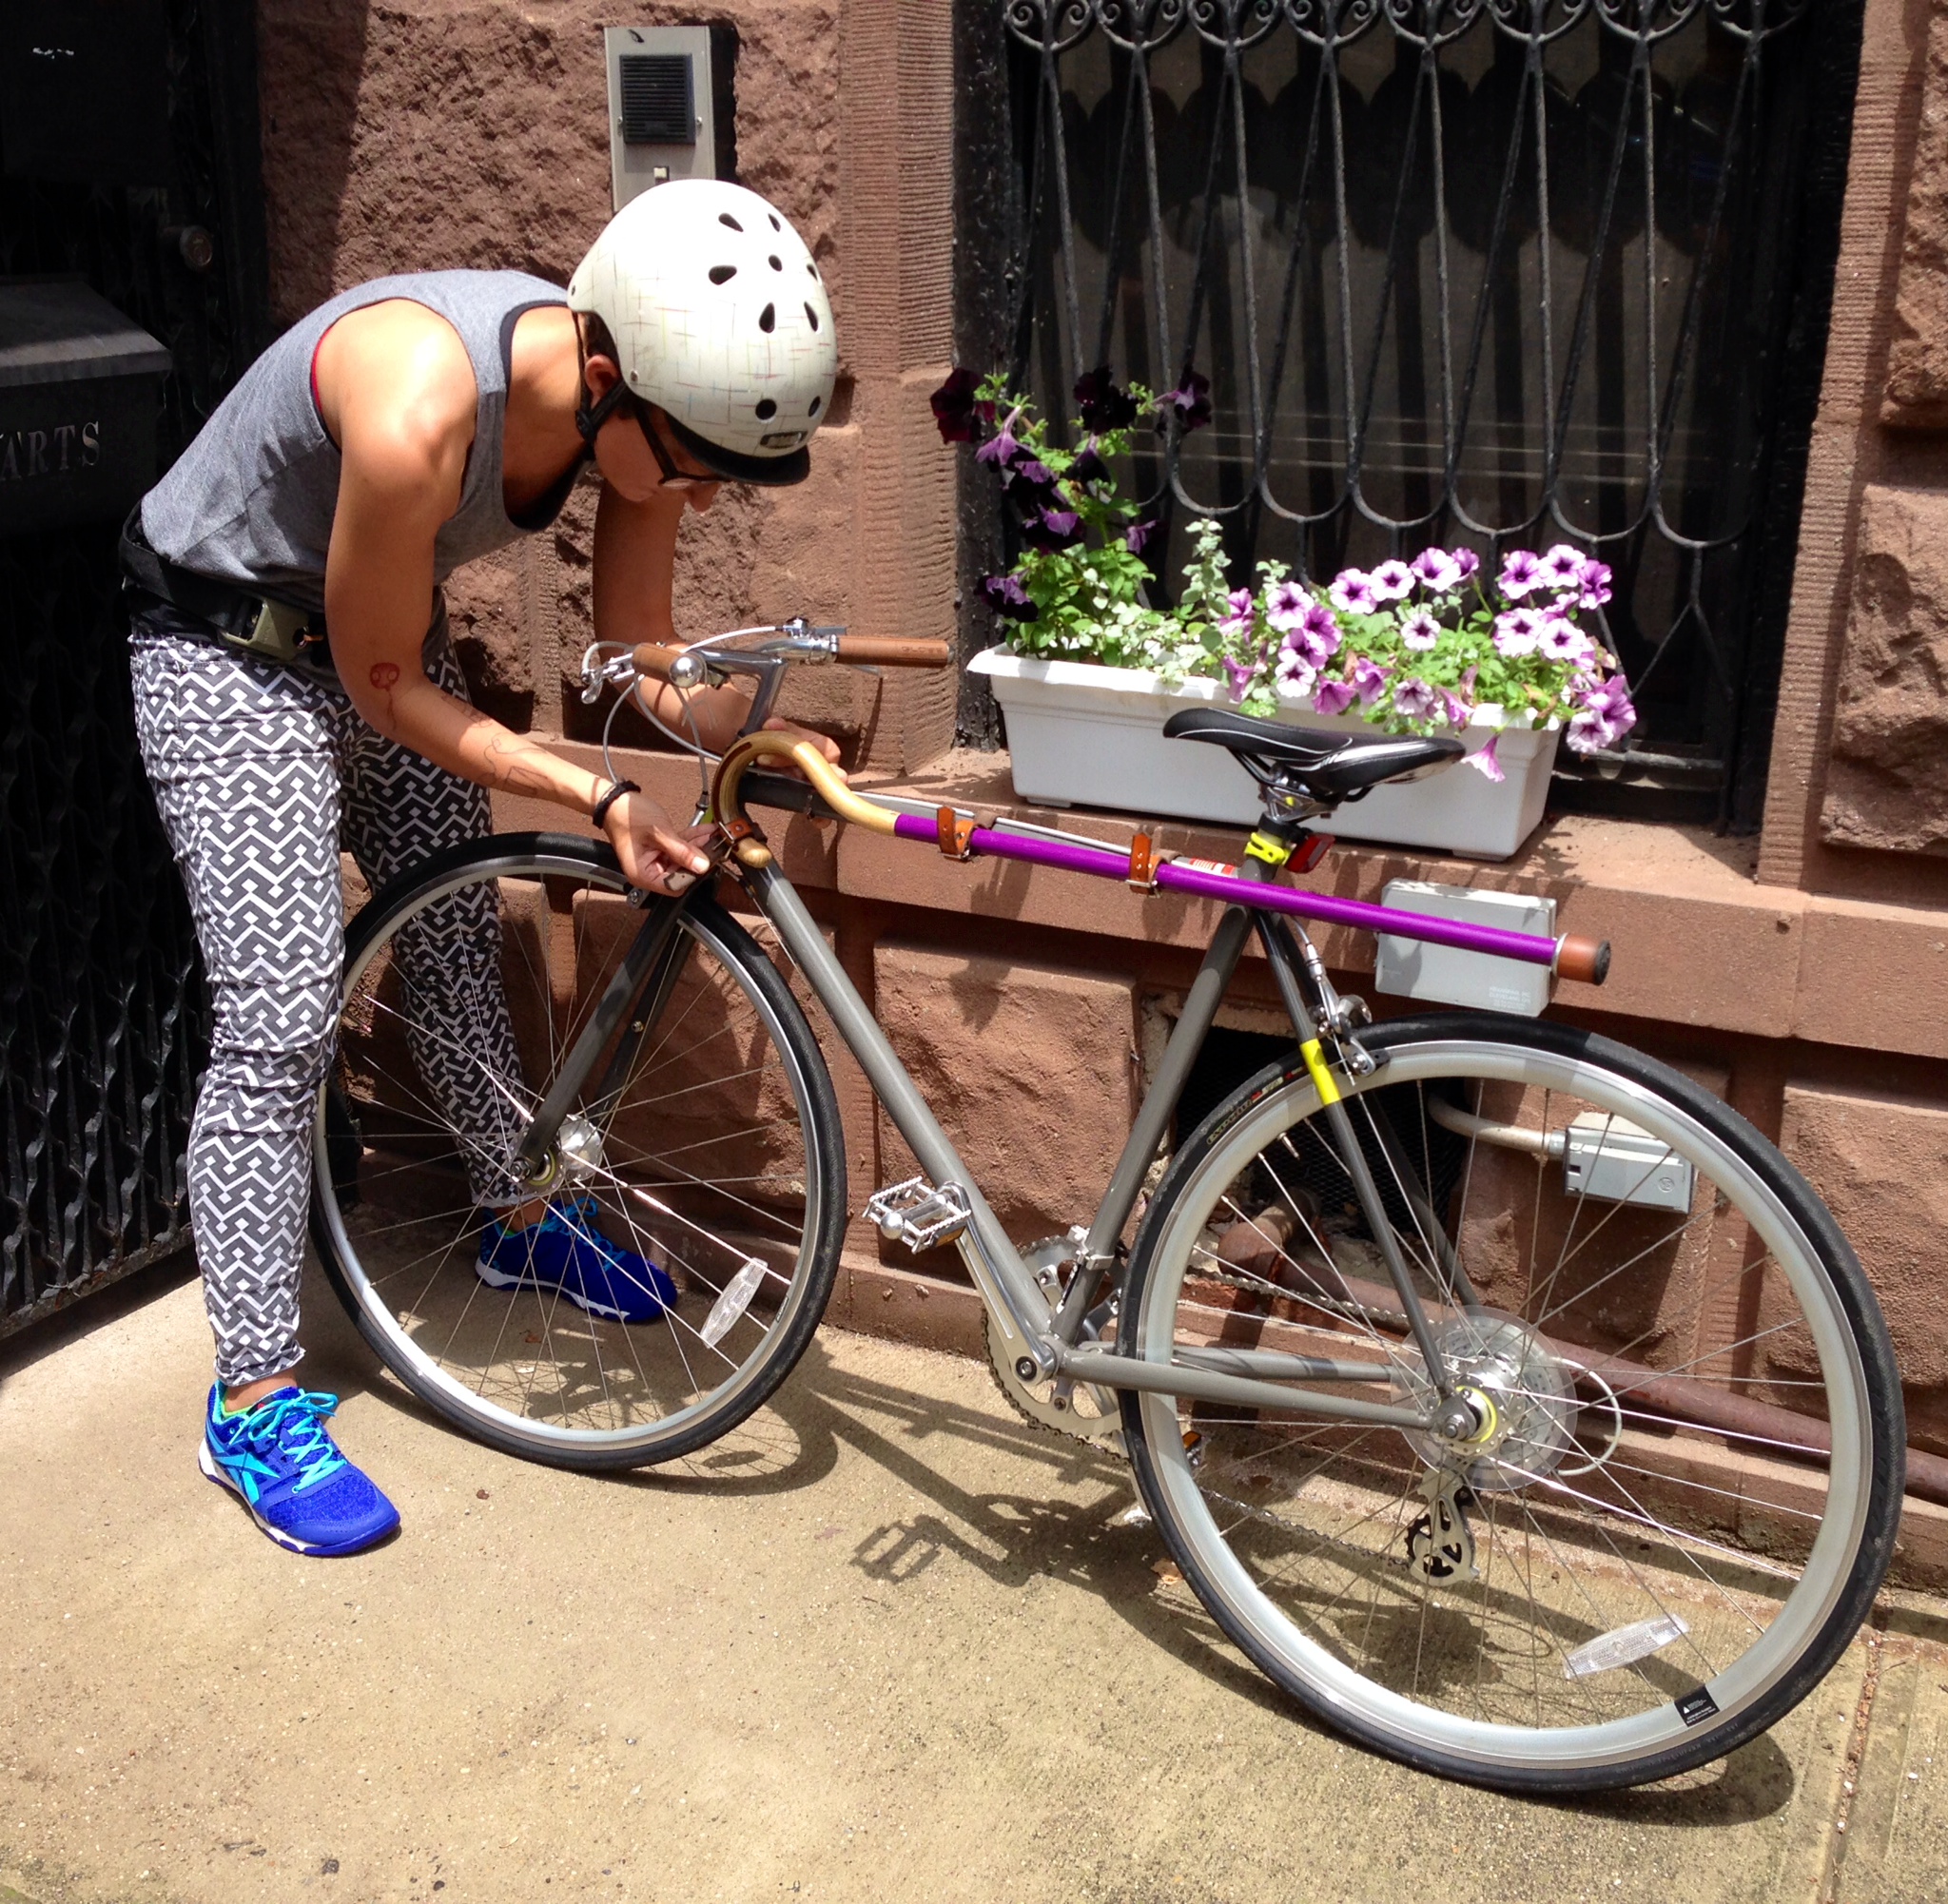 Liz Jackson on a New York City sidewalk, locking up her bike. Her purple cane is attached by leather straps and metal buckles in parallel to the bike's long body, keeping it secure and out of the way for her ride.